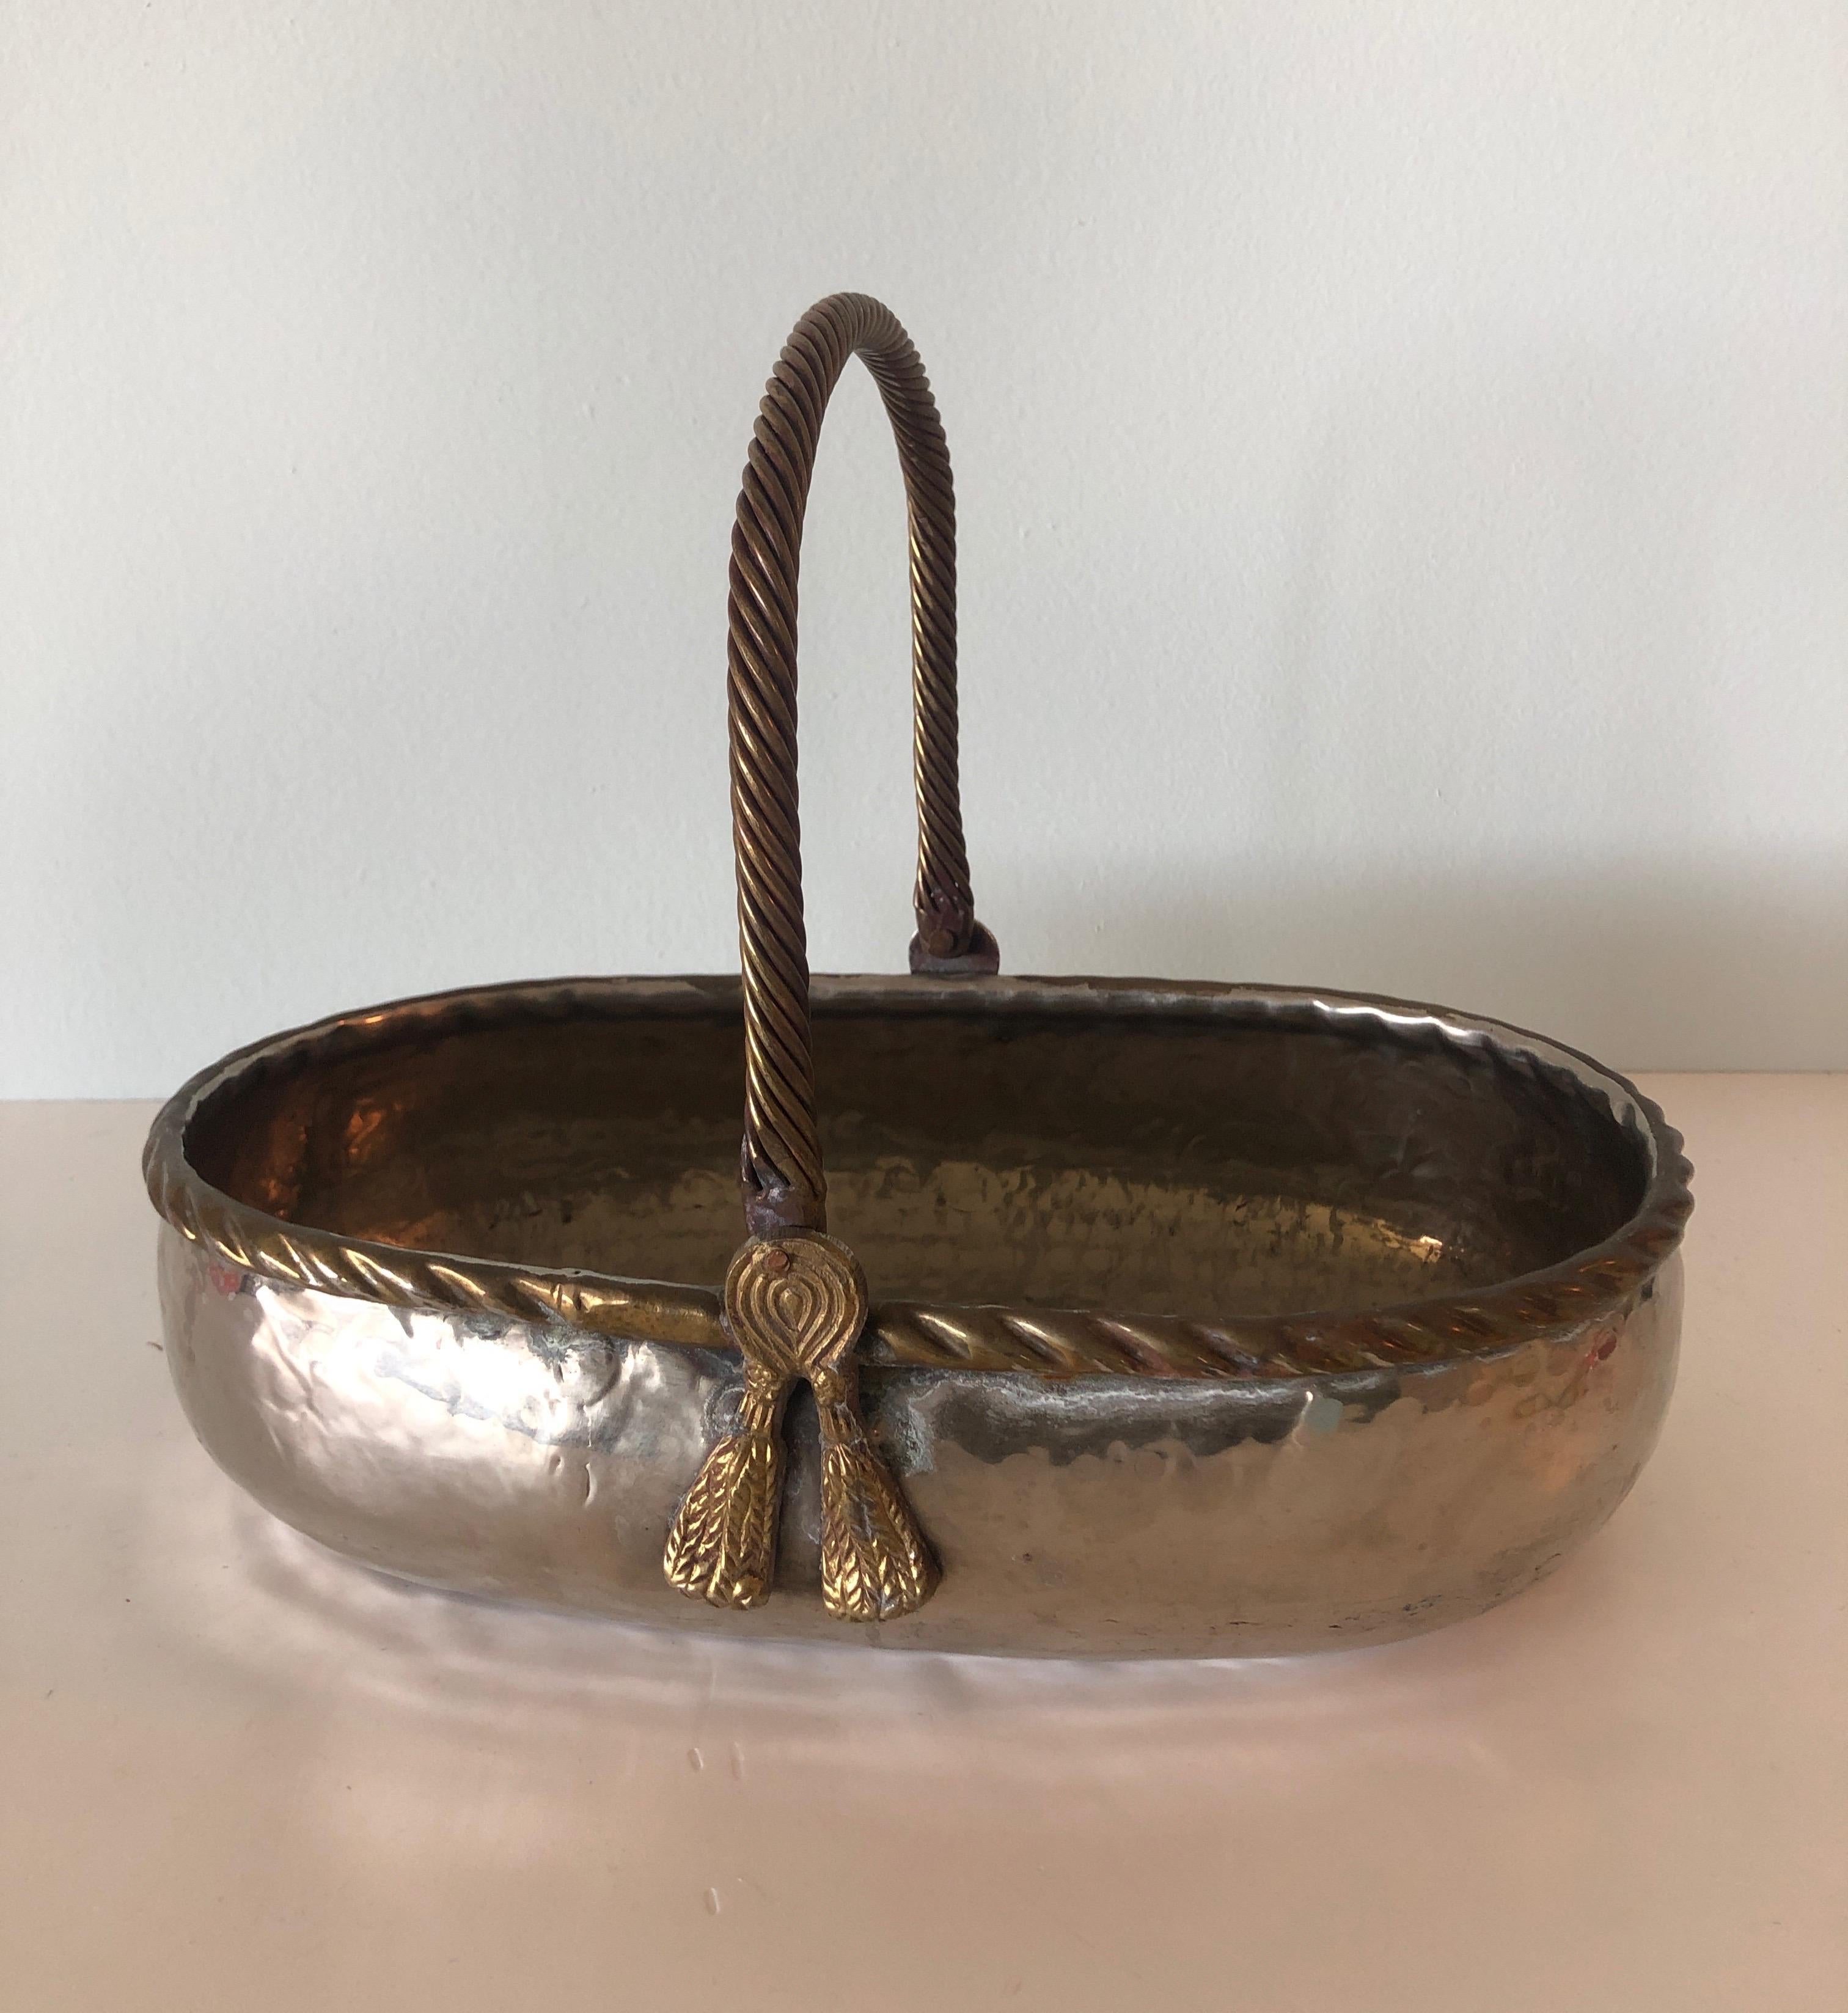 Small hand-hammered silver and brass Indian metal decorative basket.
Size: 11.75 x 6.75 x 3.75 